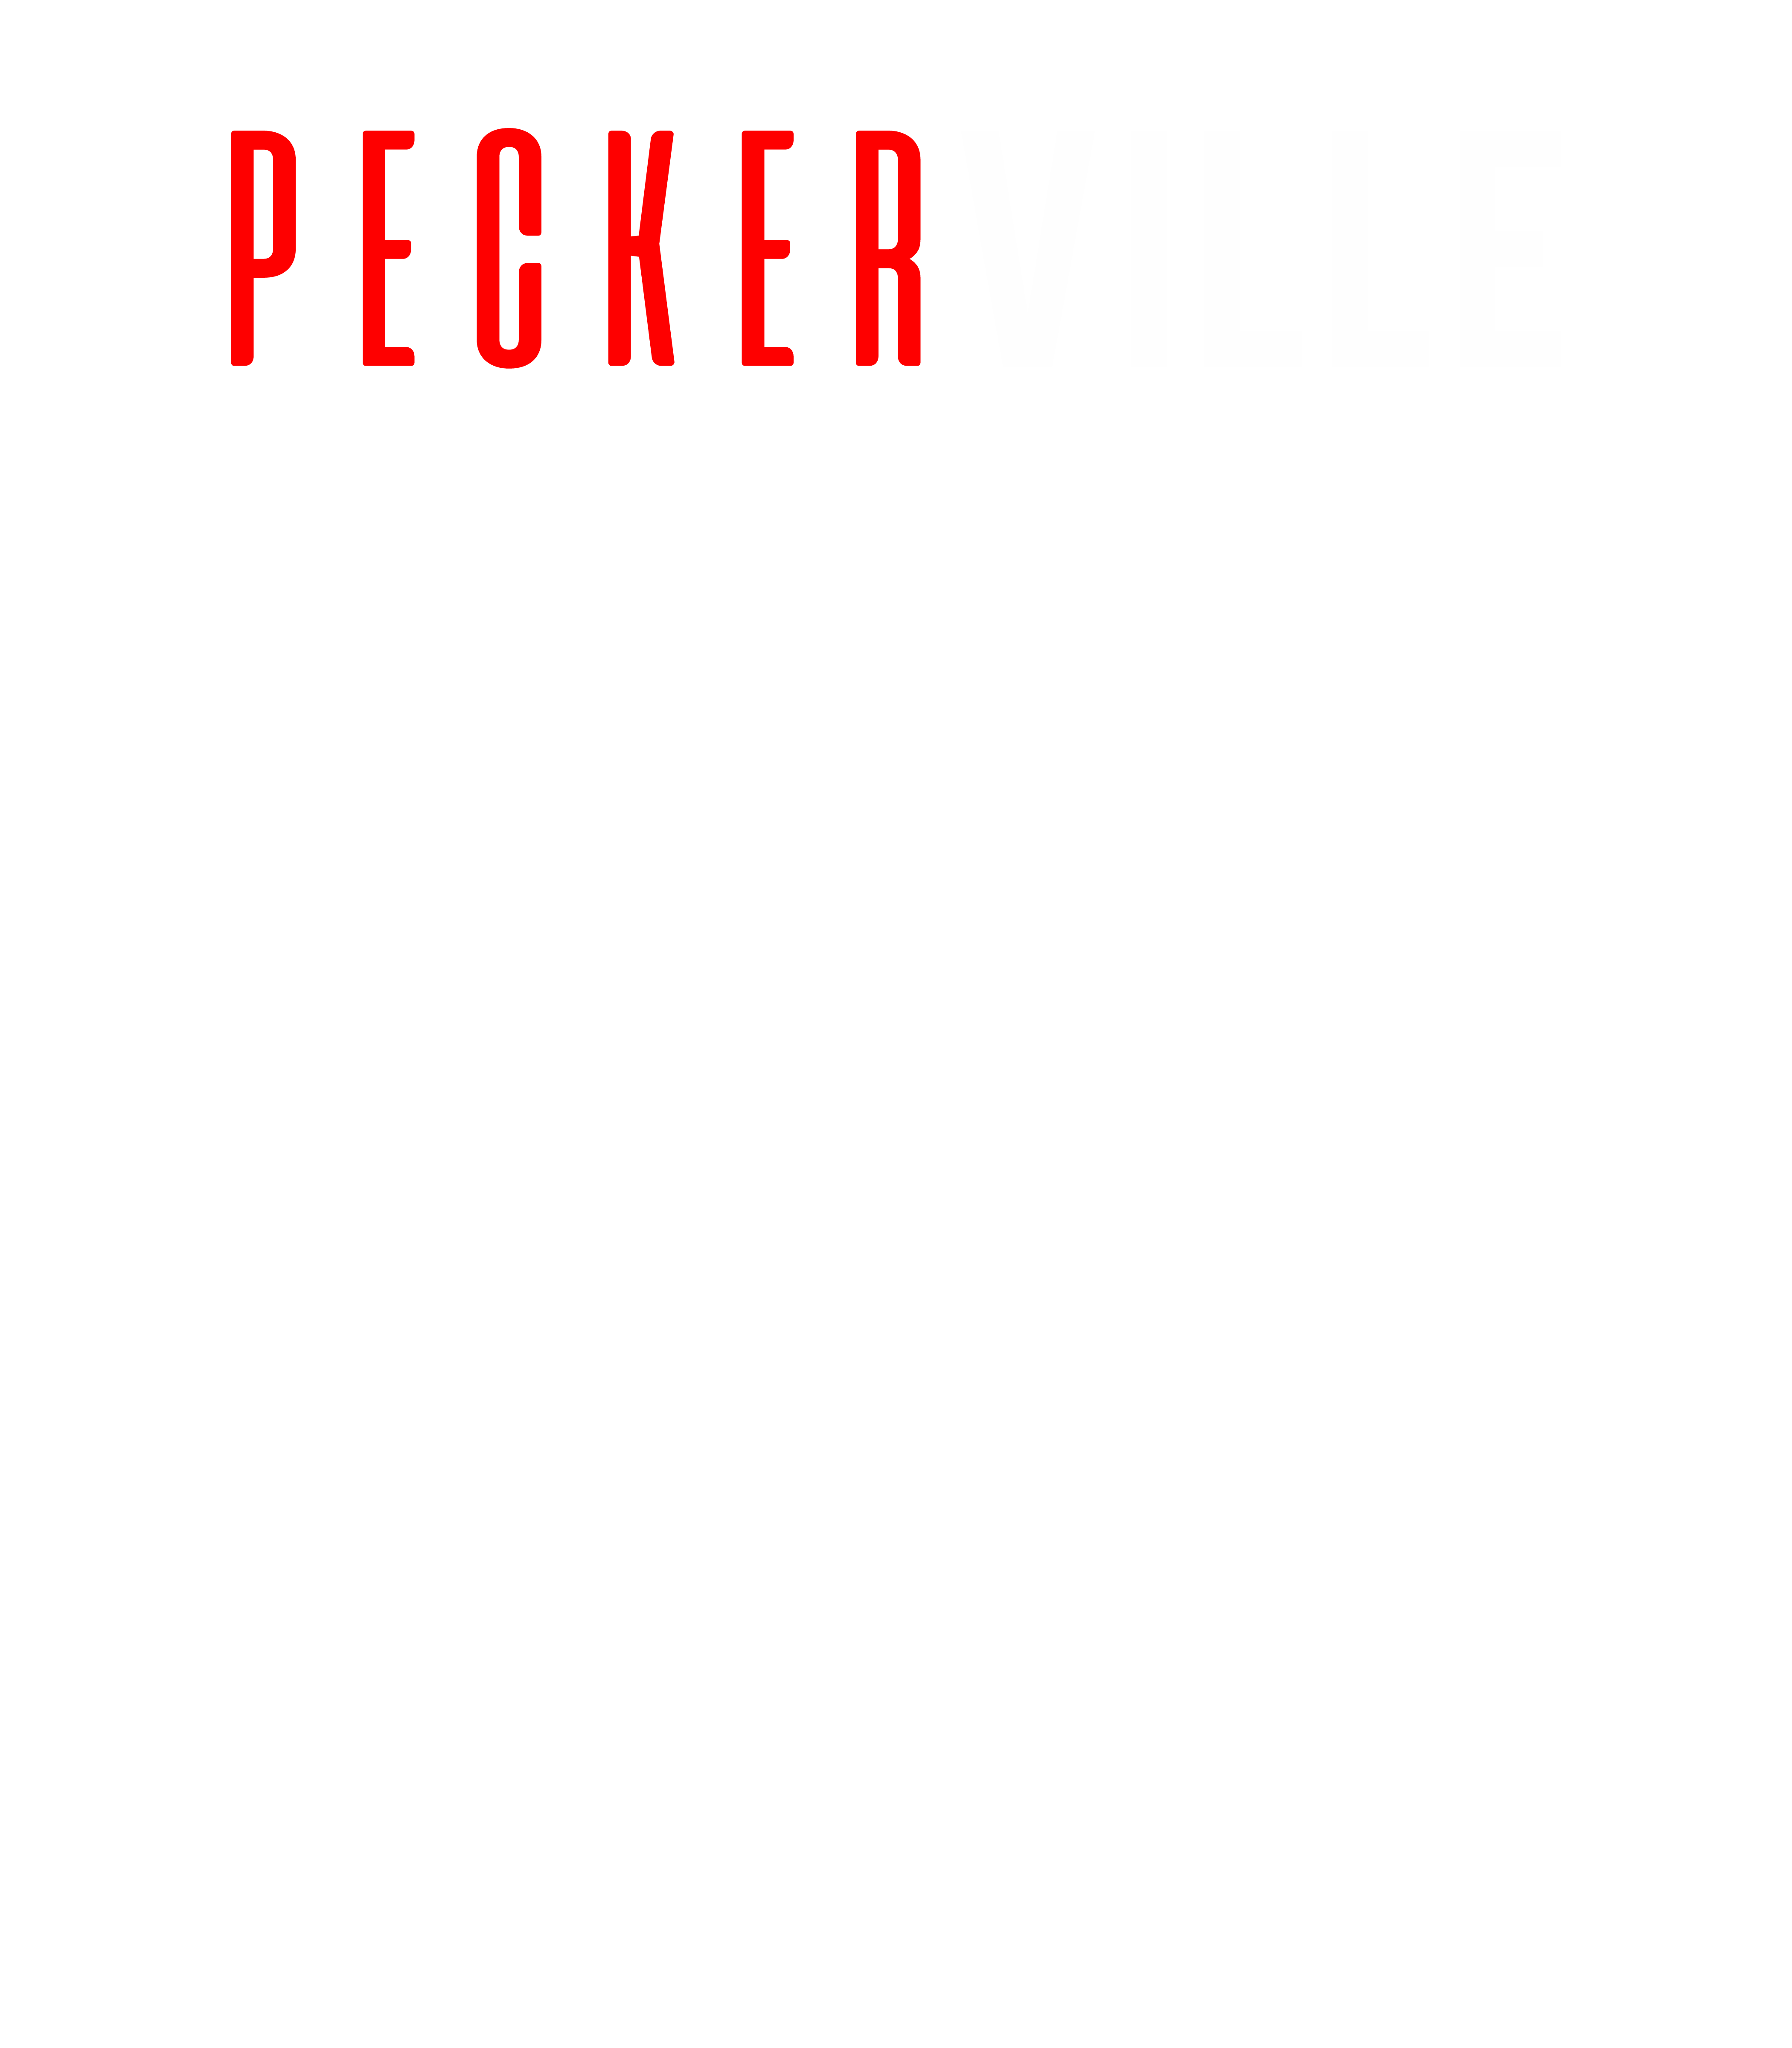 Peckerville Red White Text